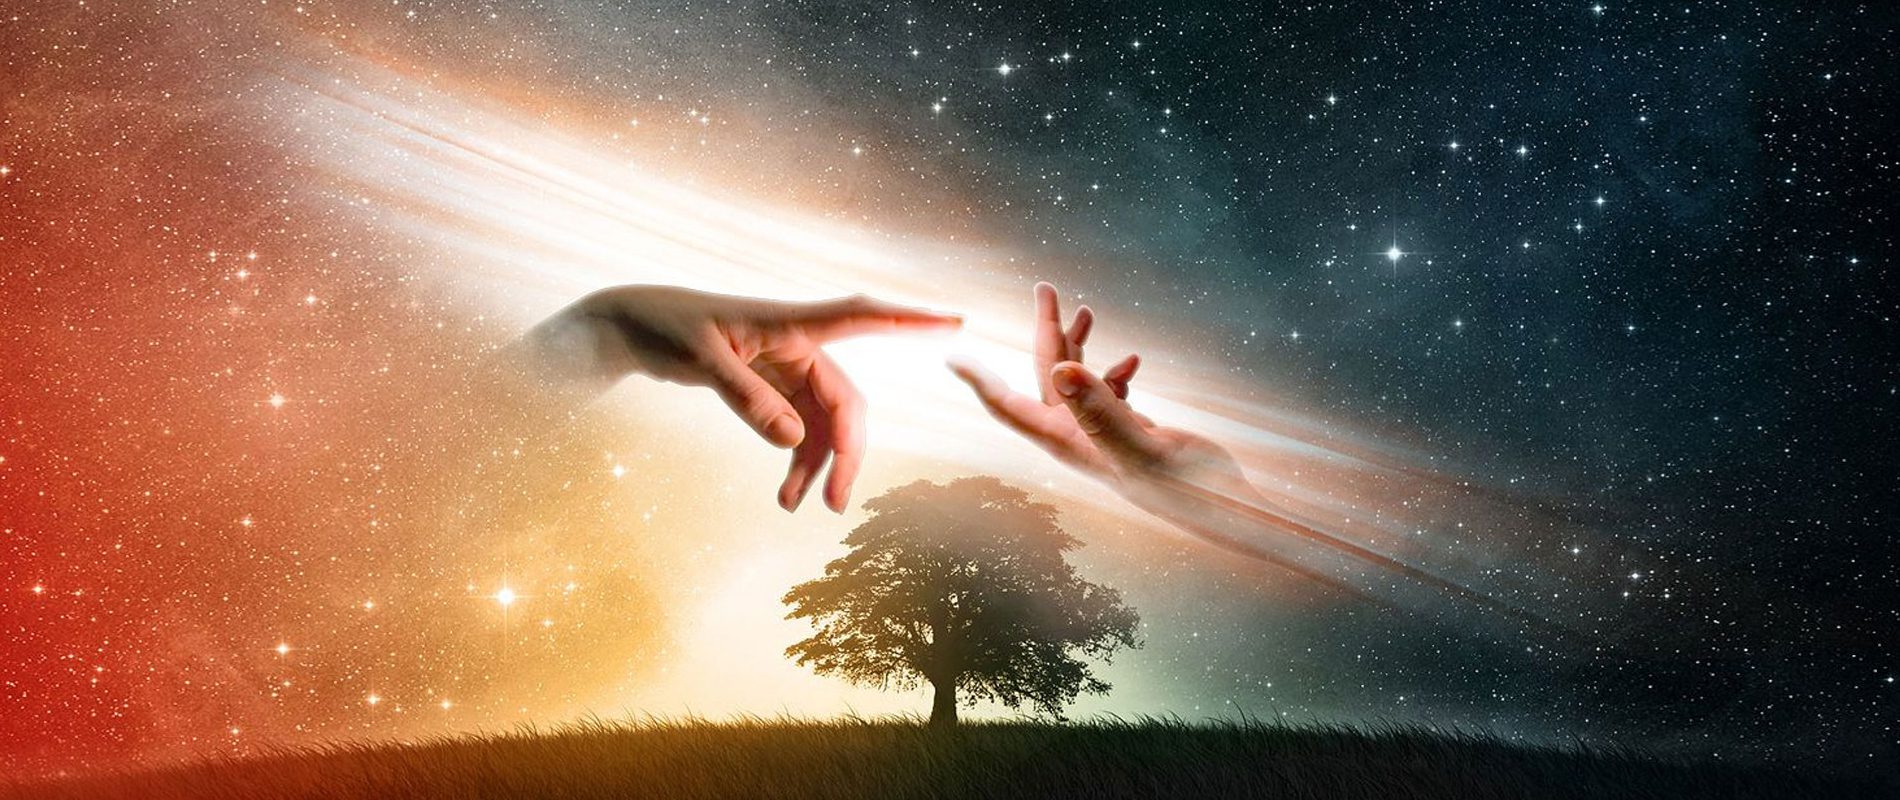 A person reaching for the stars with their hands